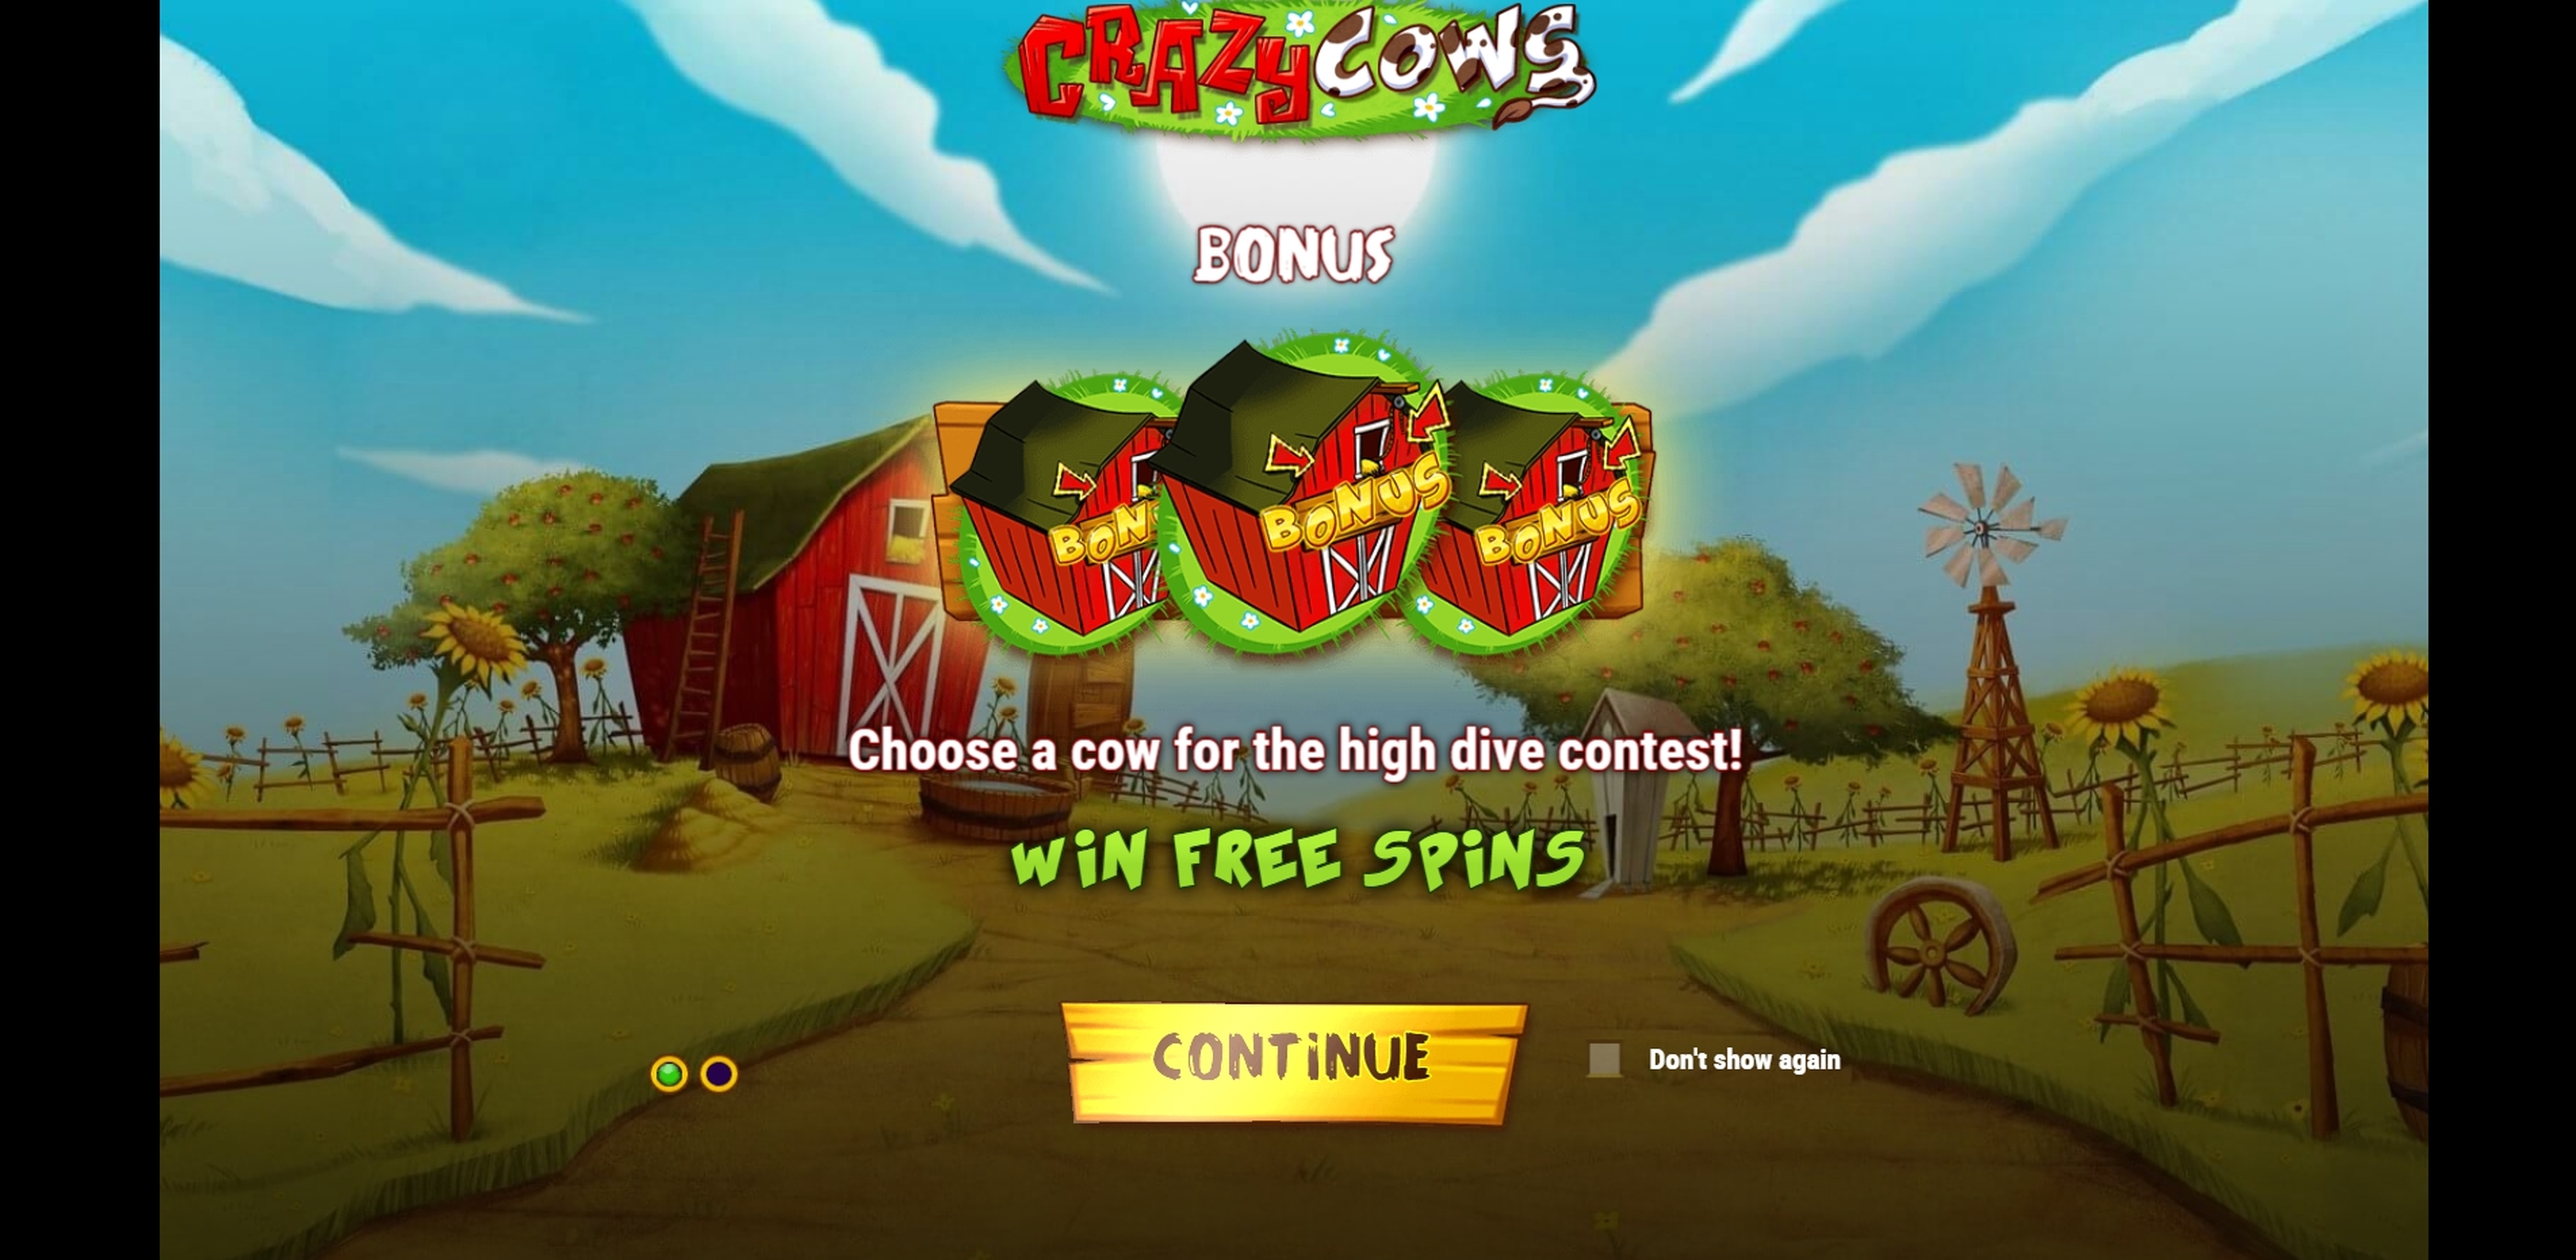 Play Crazy Cows Free Casino Slot Game by Playn GO